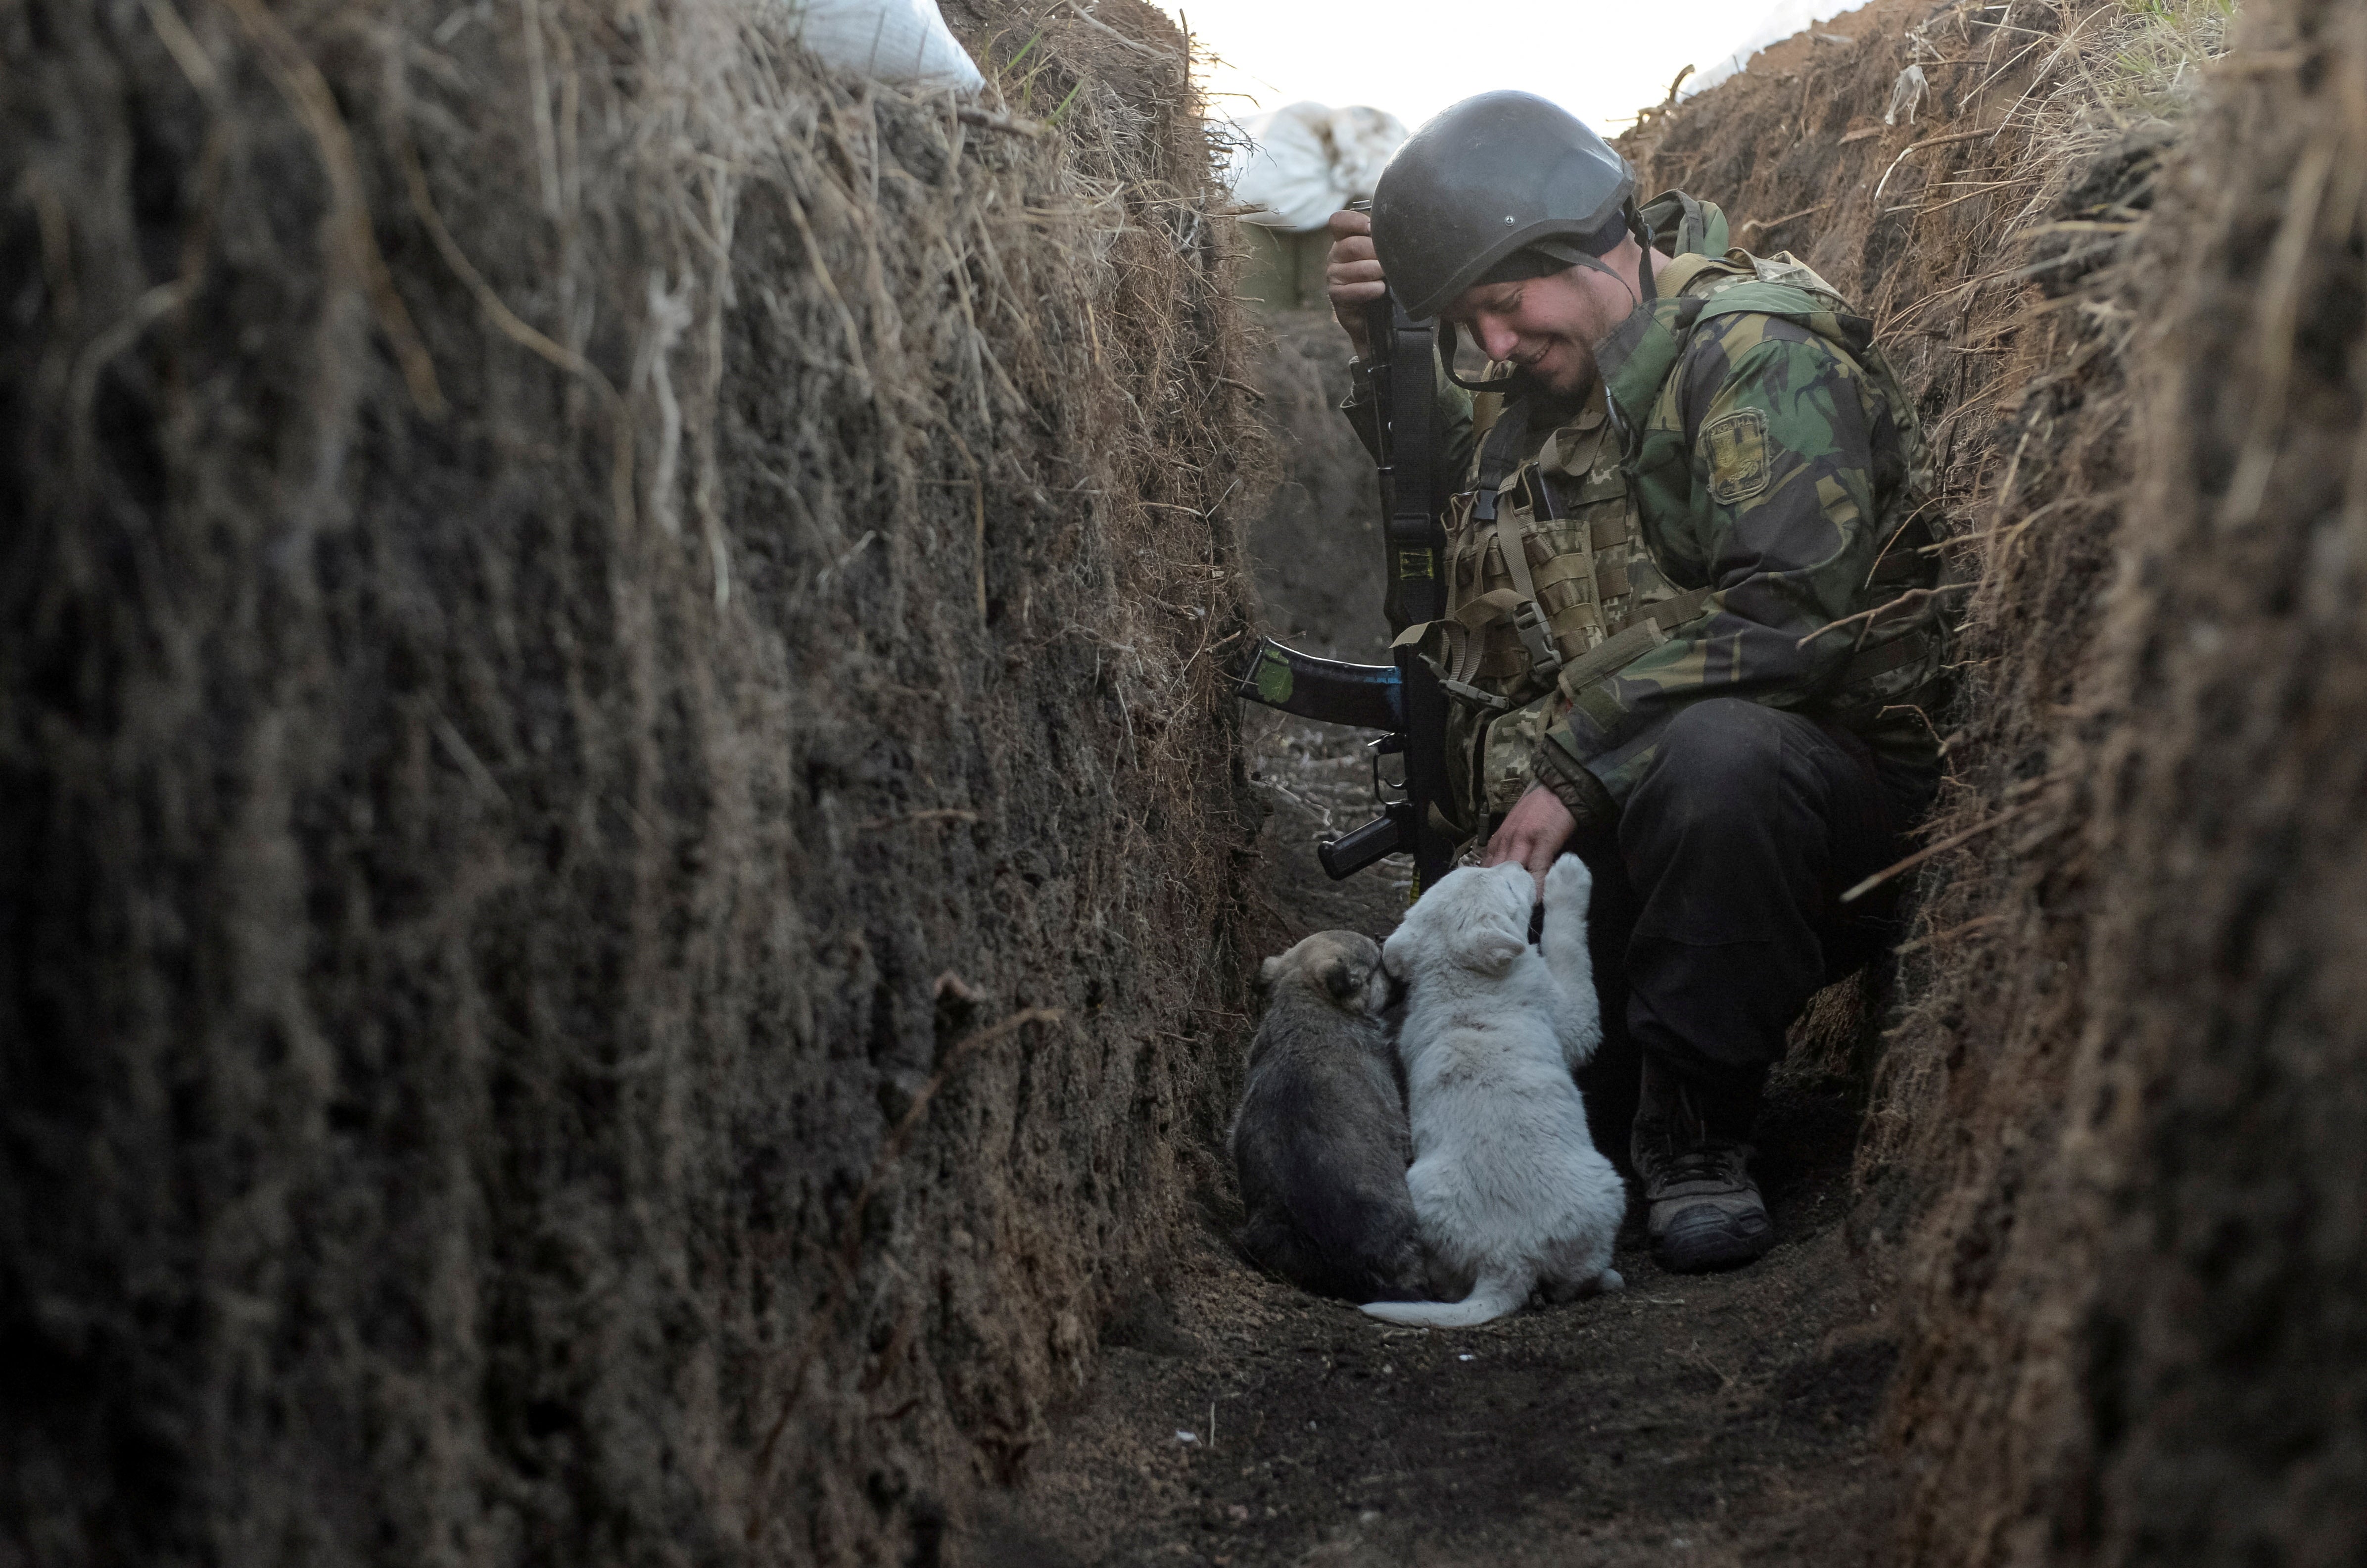 Volodymyr, a member of the Ukrainian armed forces, plays with puppies in a trench on the line of separation from pro-Russian rebels in Donetsk, Ukraine